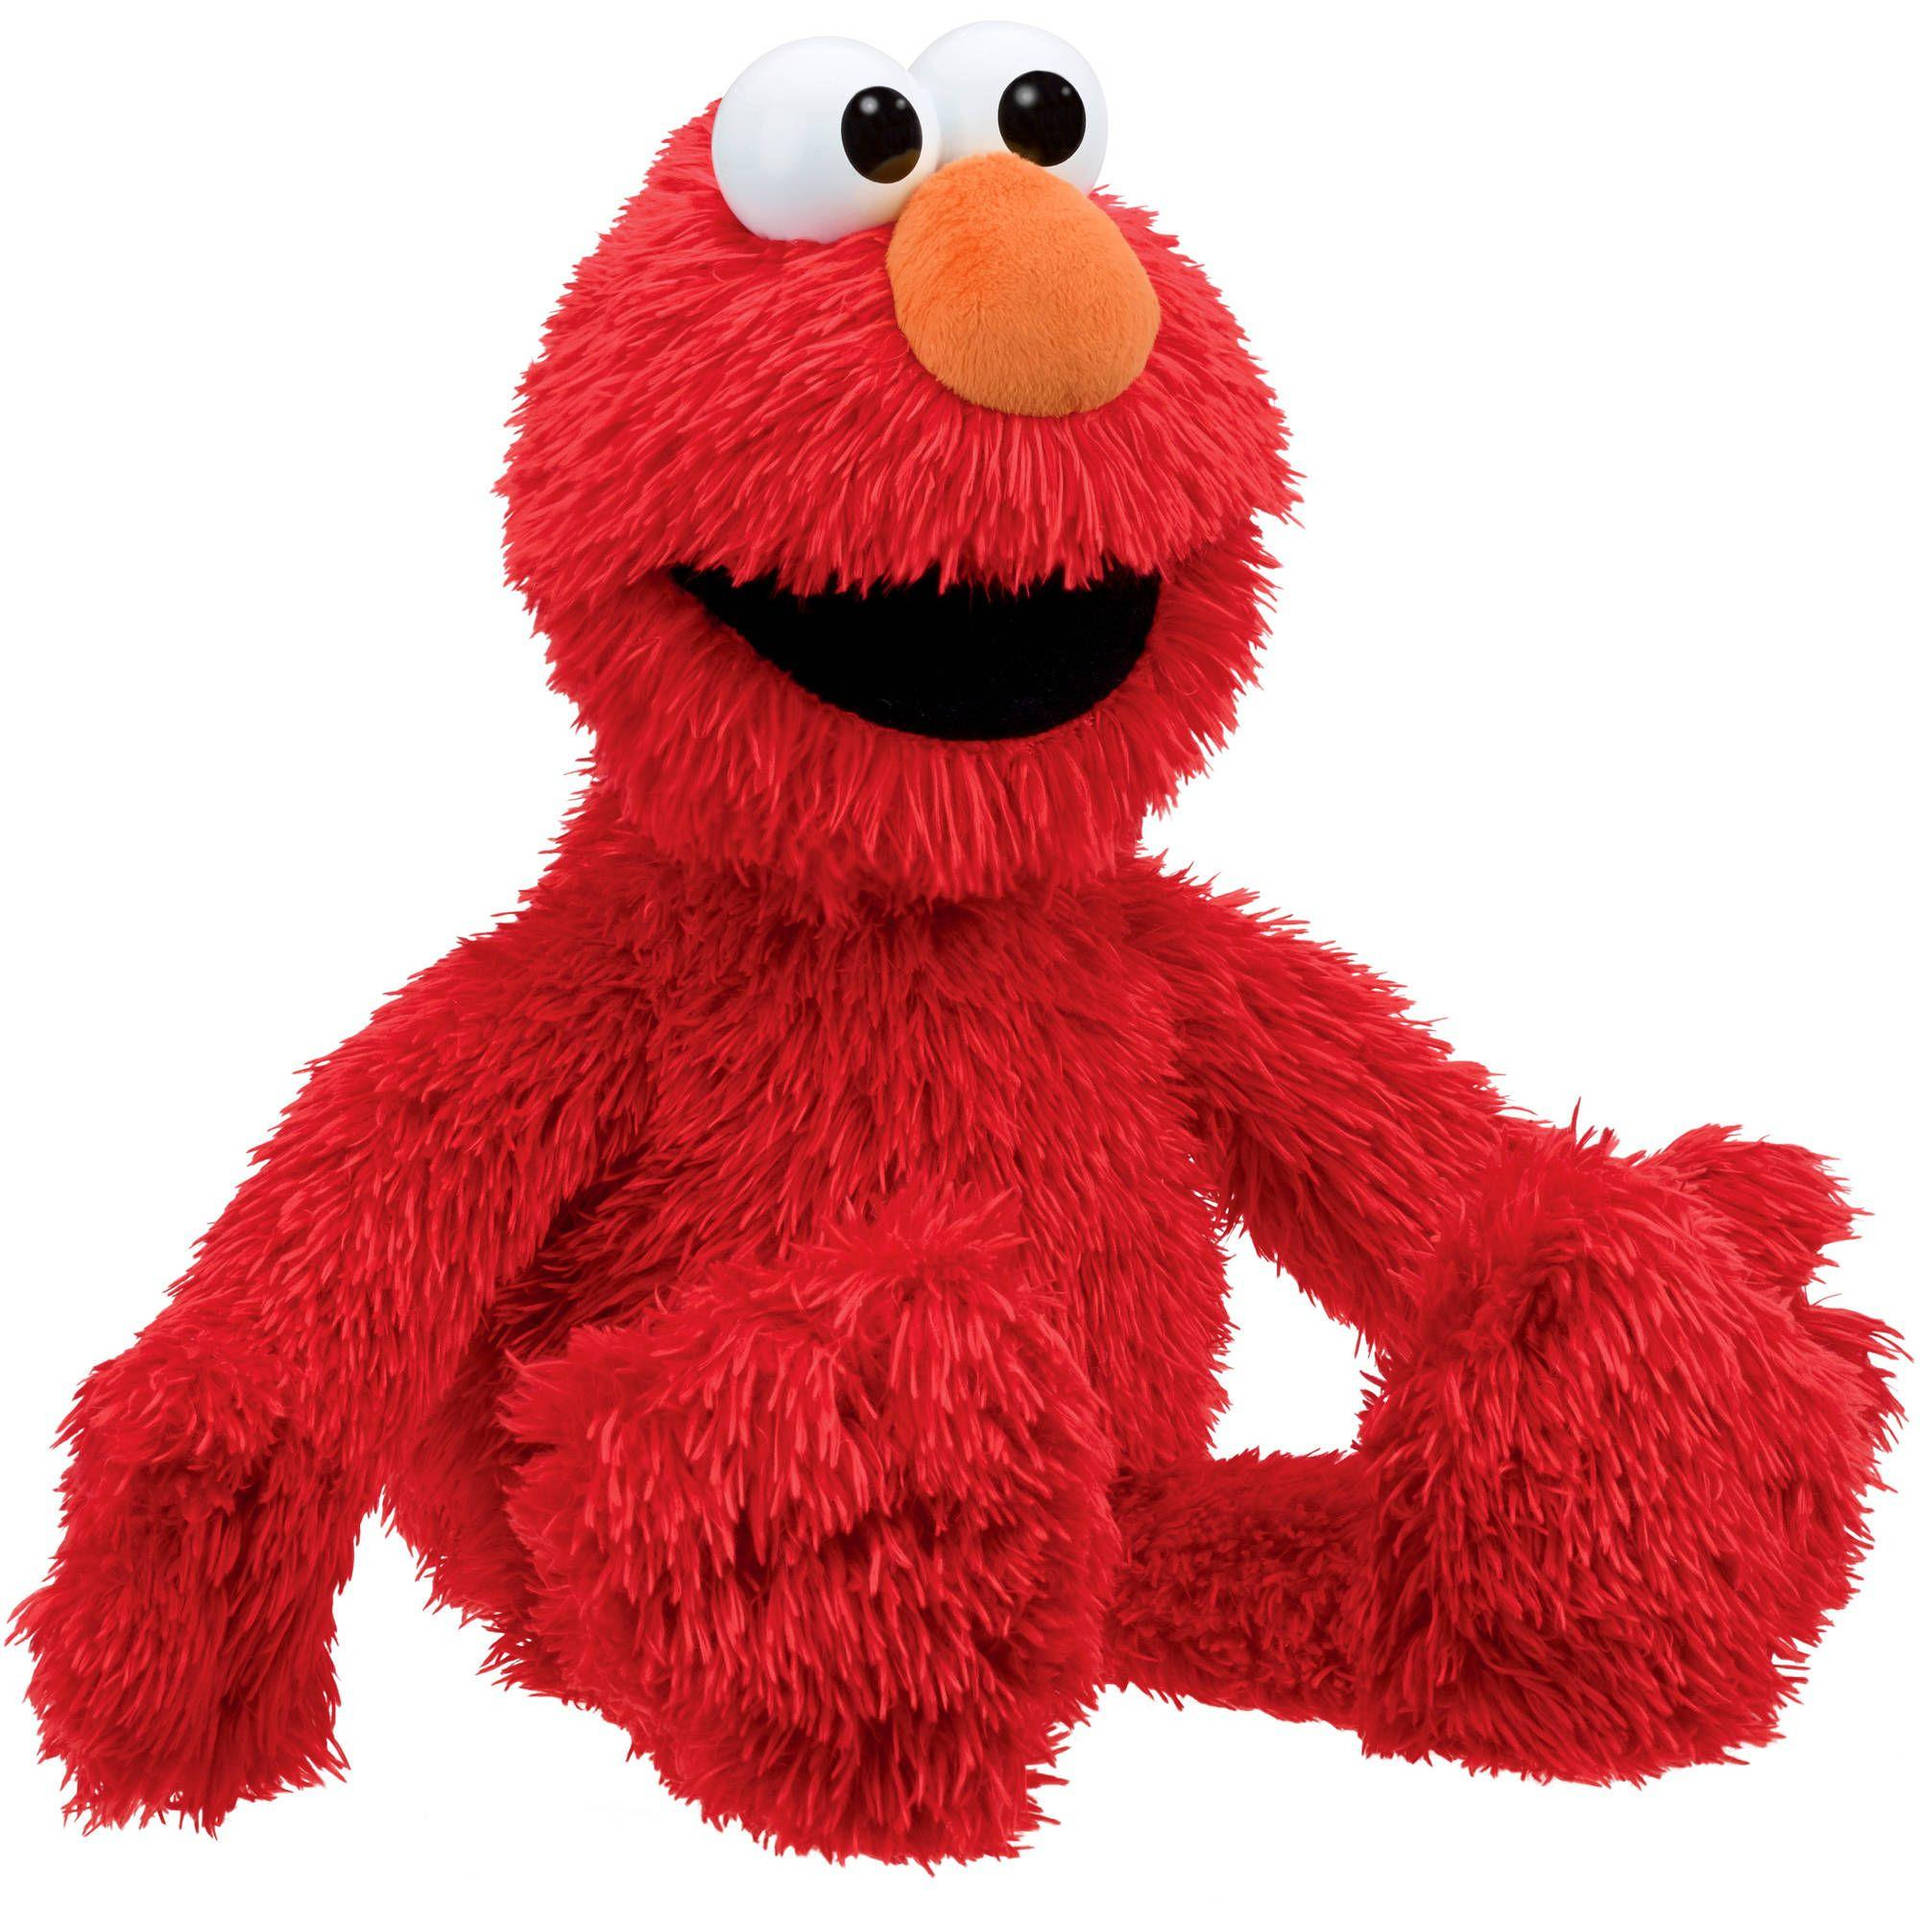 Elmo The Red Muppet Background